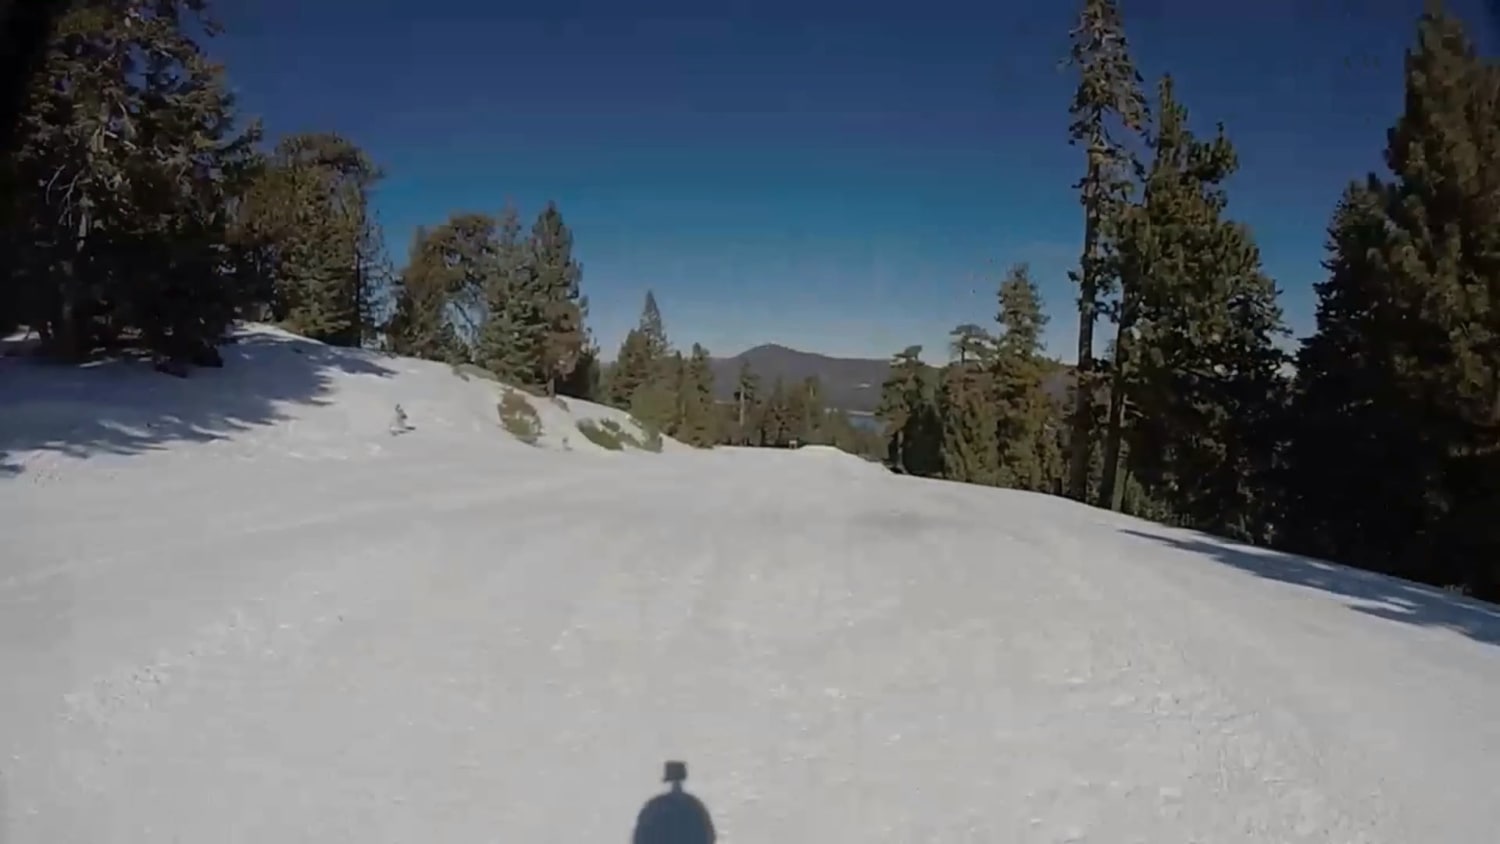 My 9yo sending it without fear. Didn’t work out this time but she was back at it on the next run.